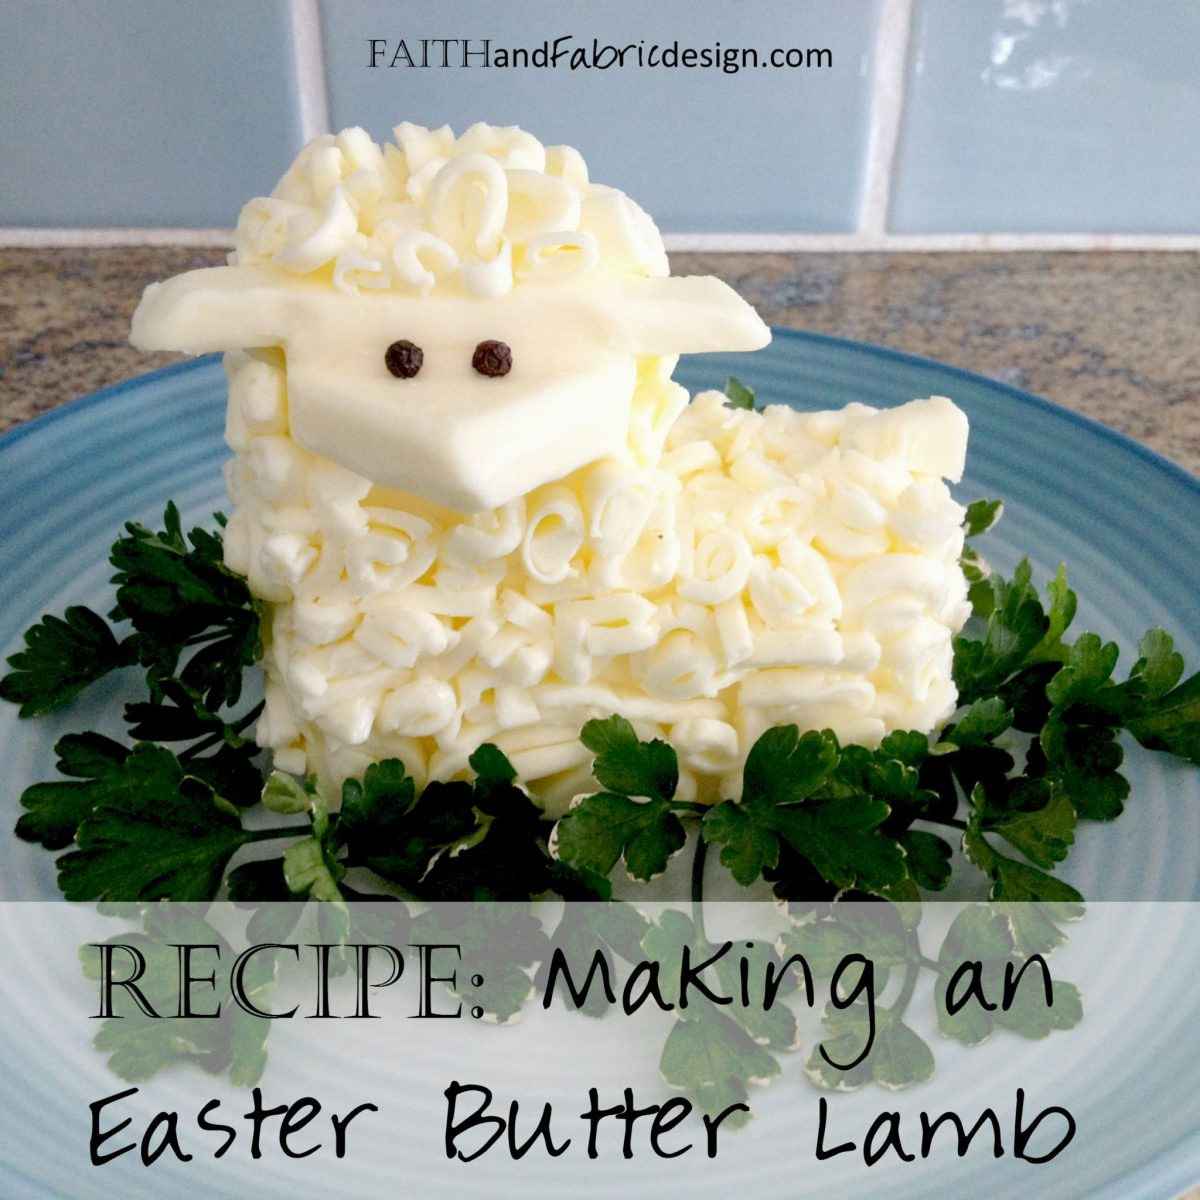 Easter Butter Lamb
 RECIPE Create a Butter Lamb for Easter Brunch – Faith and